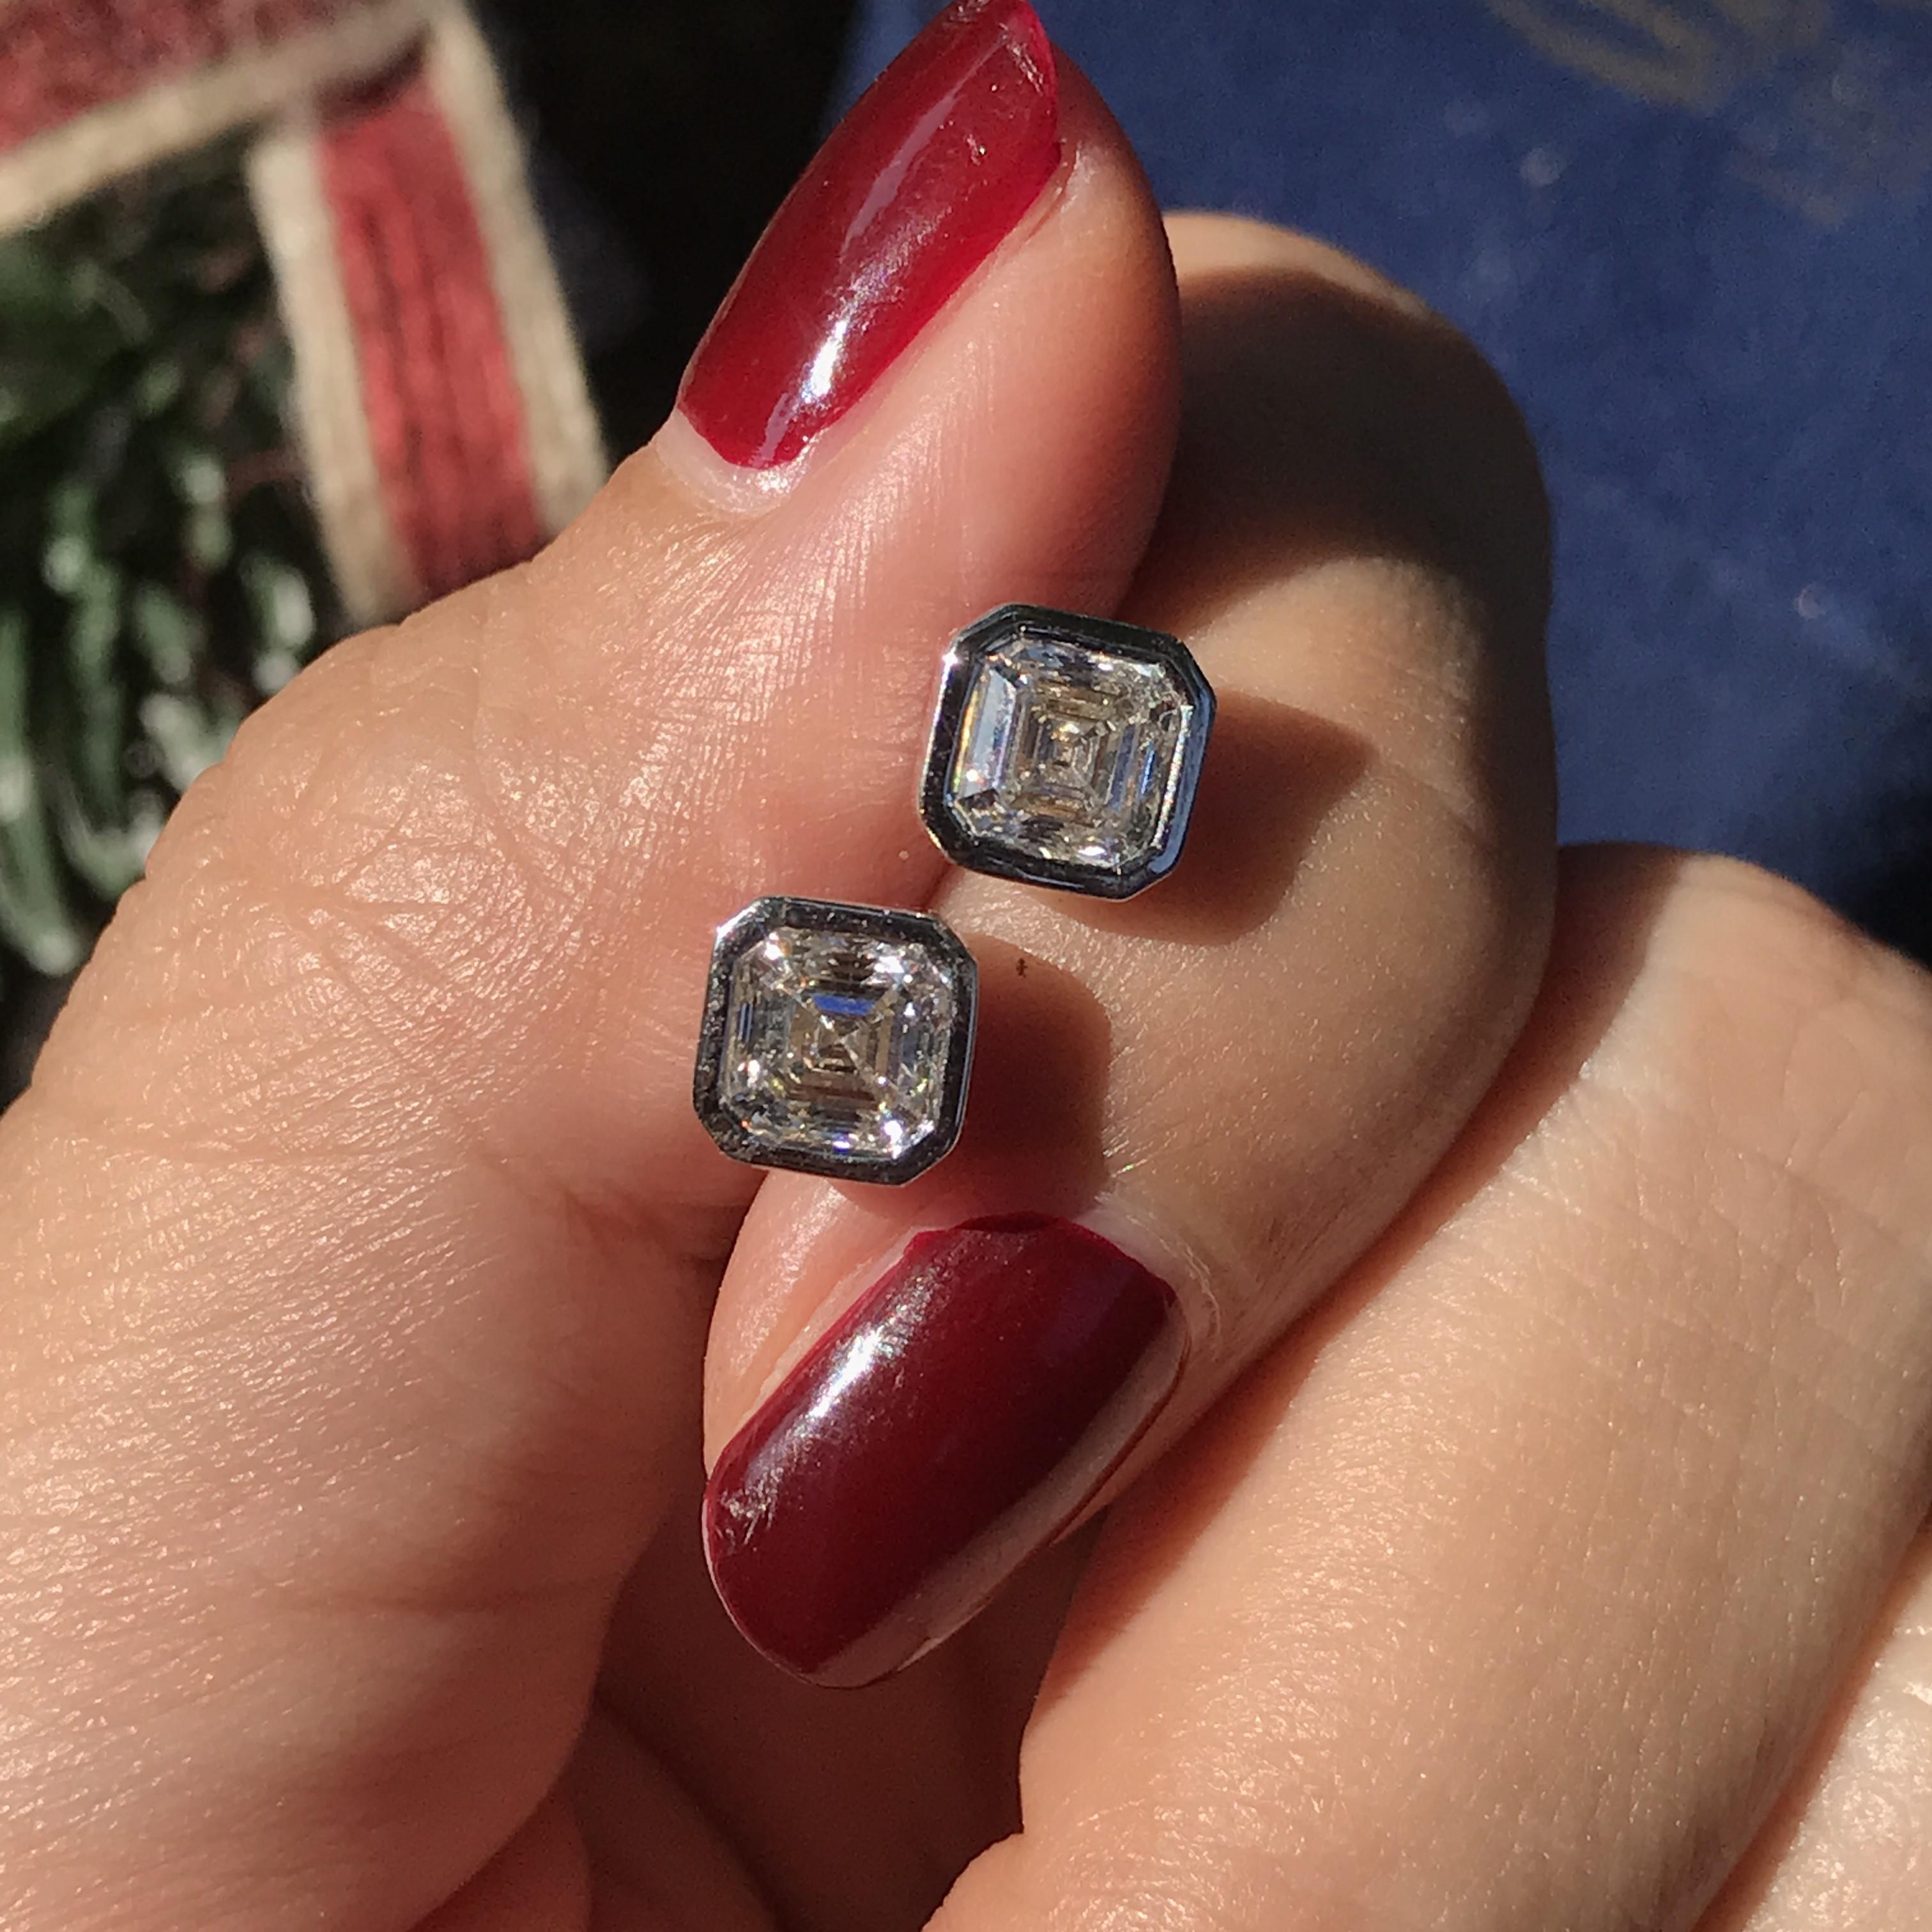 These elegantly framed studs feature emerald-cut 1.47 carats diamonds in bezel setting to flawlessly light up your look.

Earrings Information
Metal: 18K White Gold
Width: 6 mm.
Length: 6 mm.
Weight: 3.66 g. (approx. in total)
Backing: Push